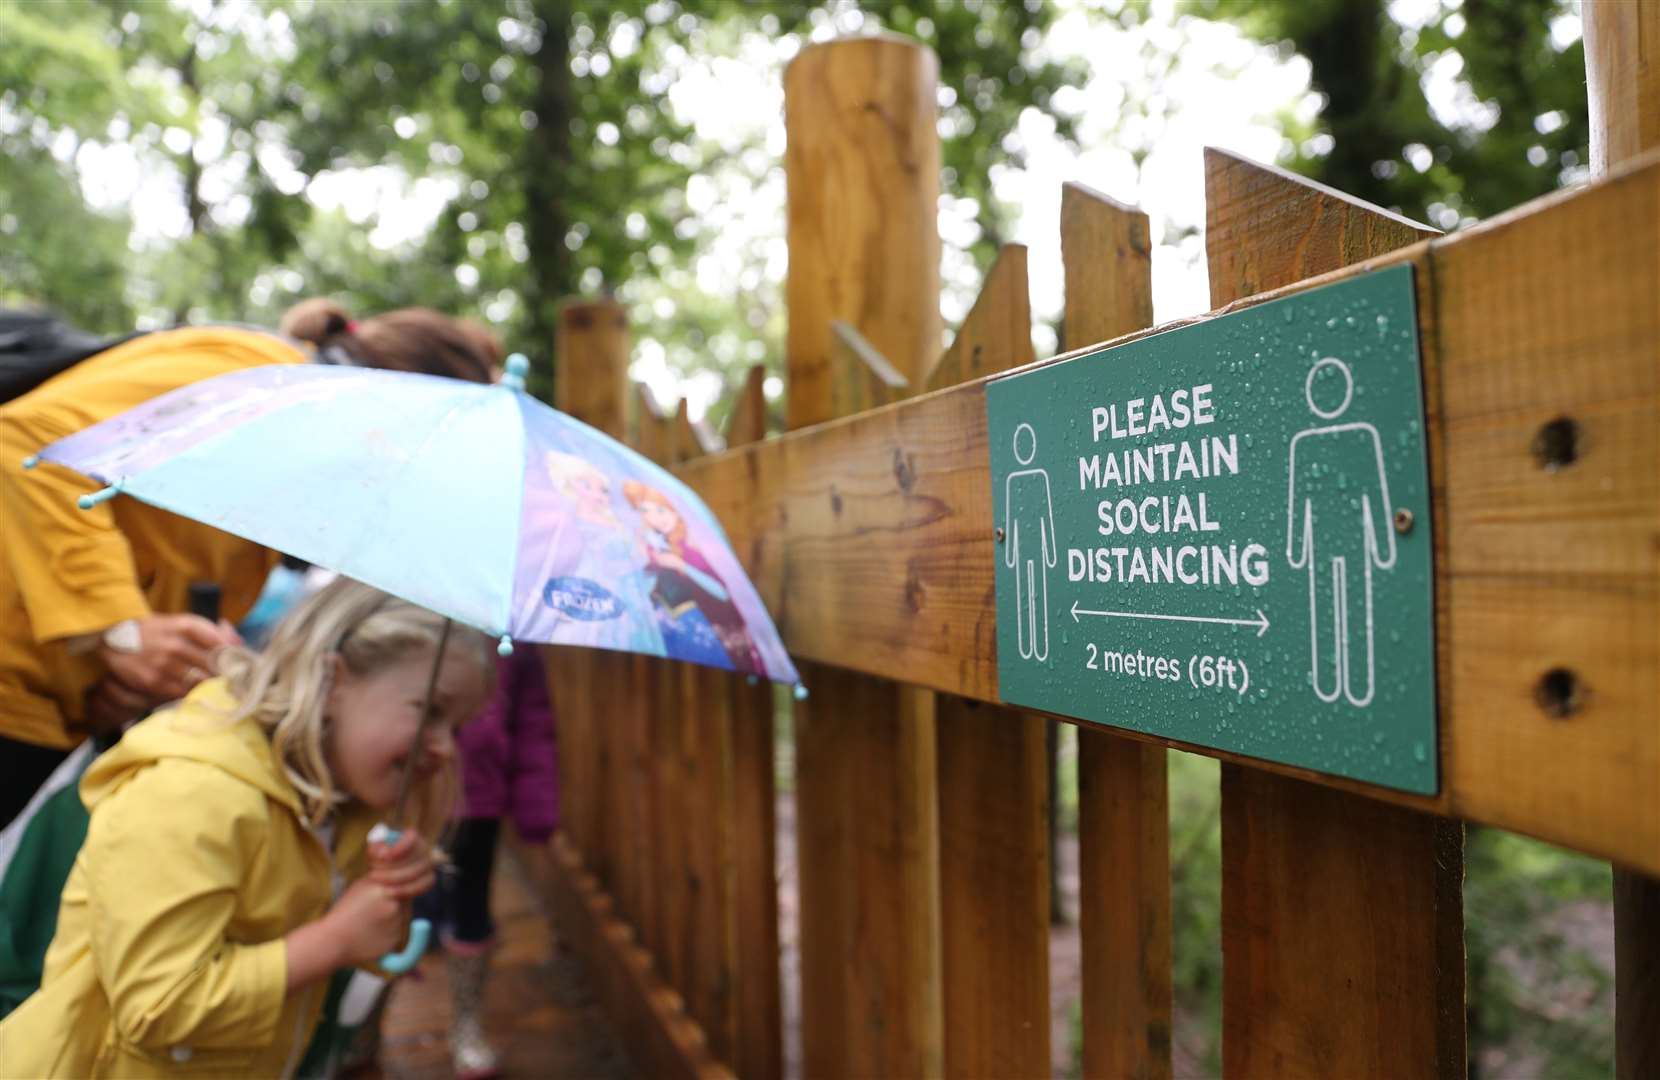 A social distancing sign at the the Wild Place Project in Bristol (PA)